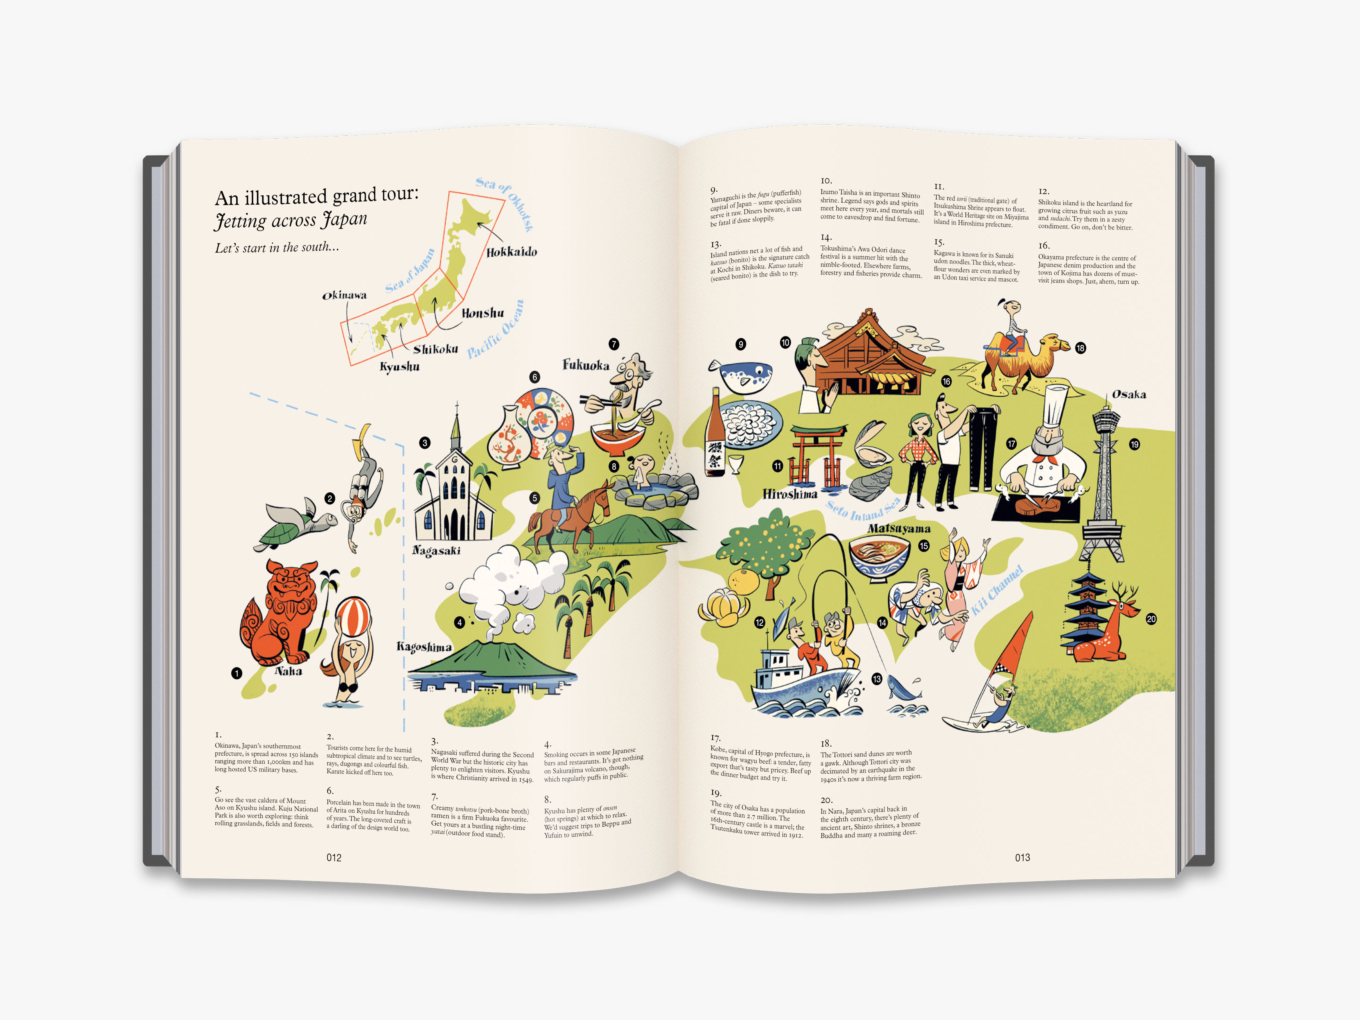 From The Monocle Book of Japan copyright Thames & Hudson Ltd 2020